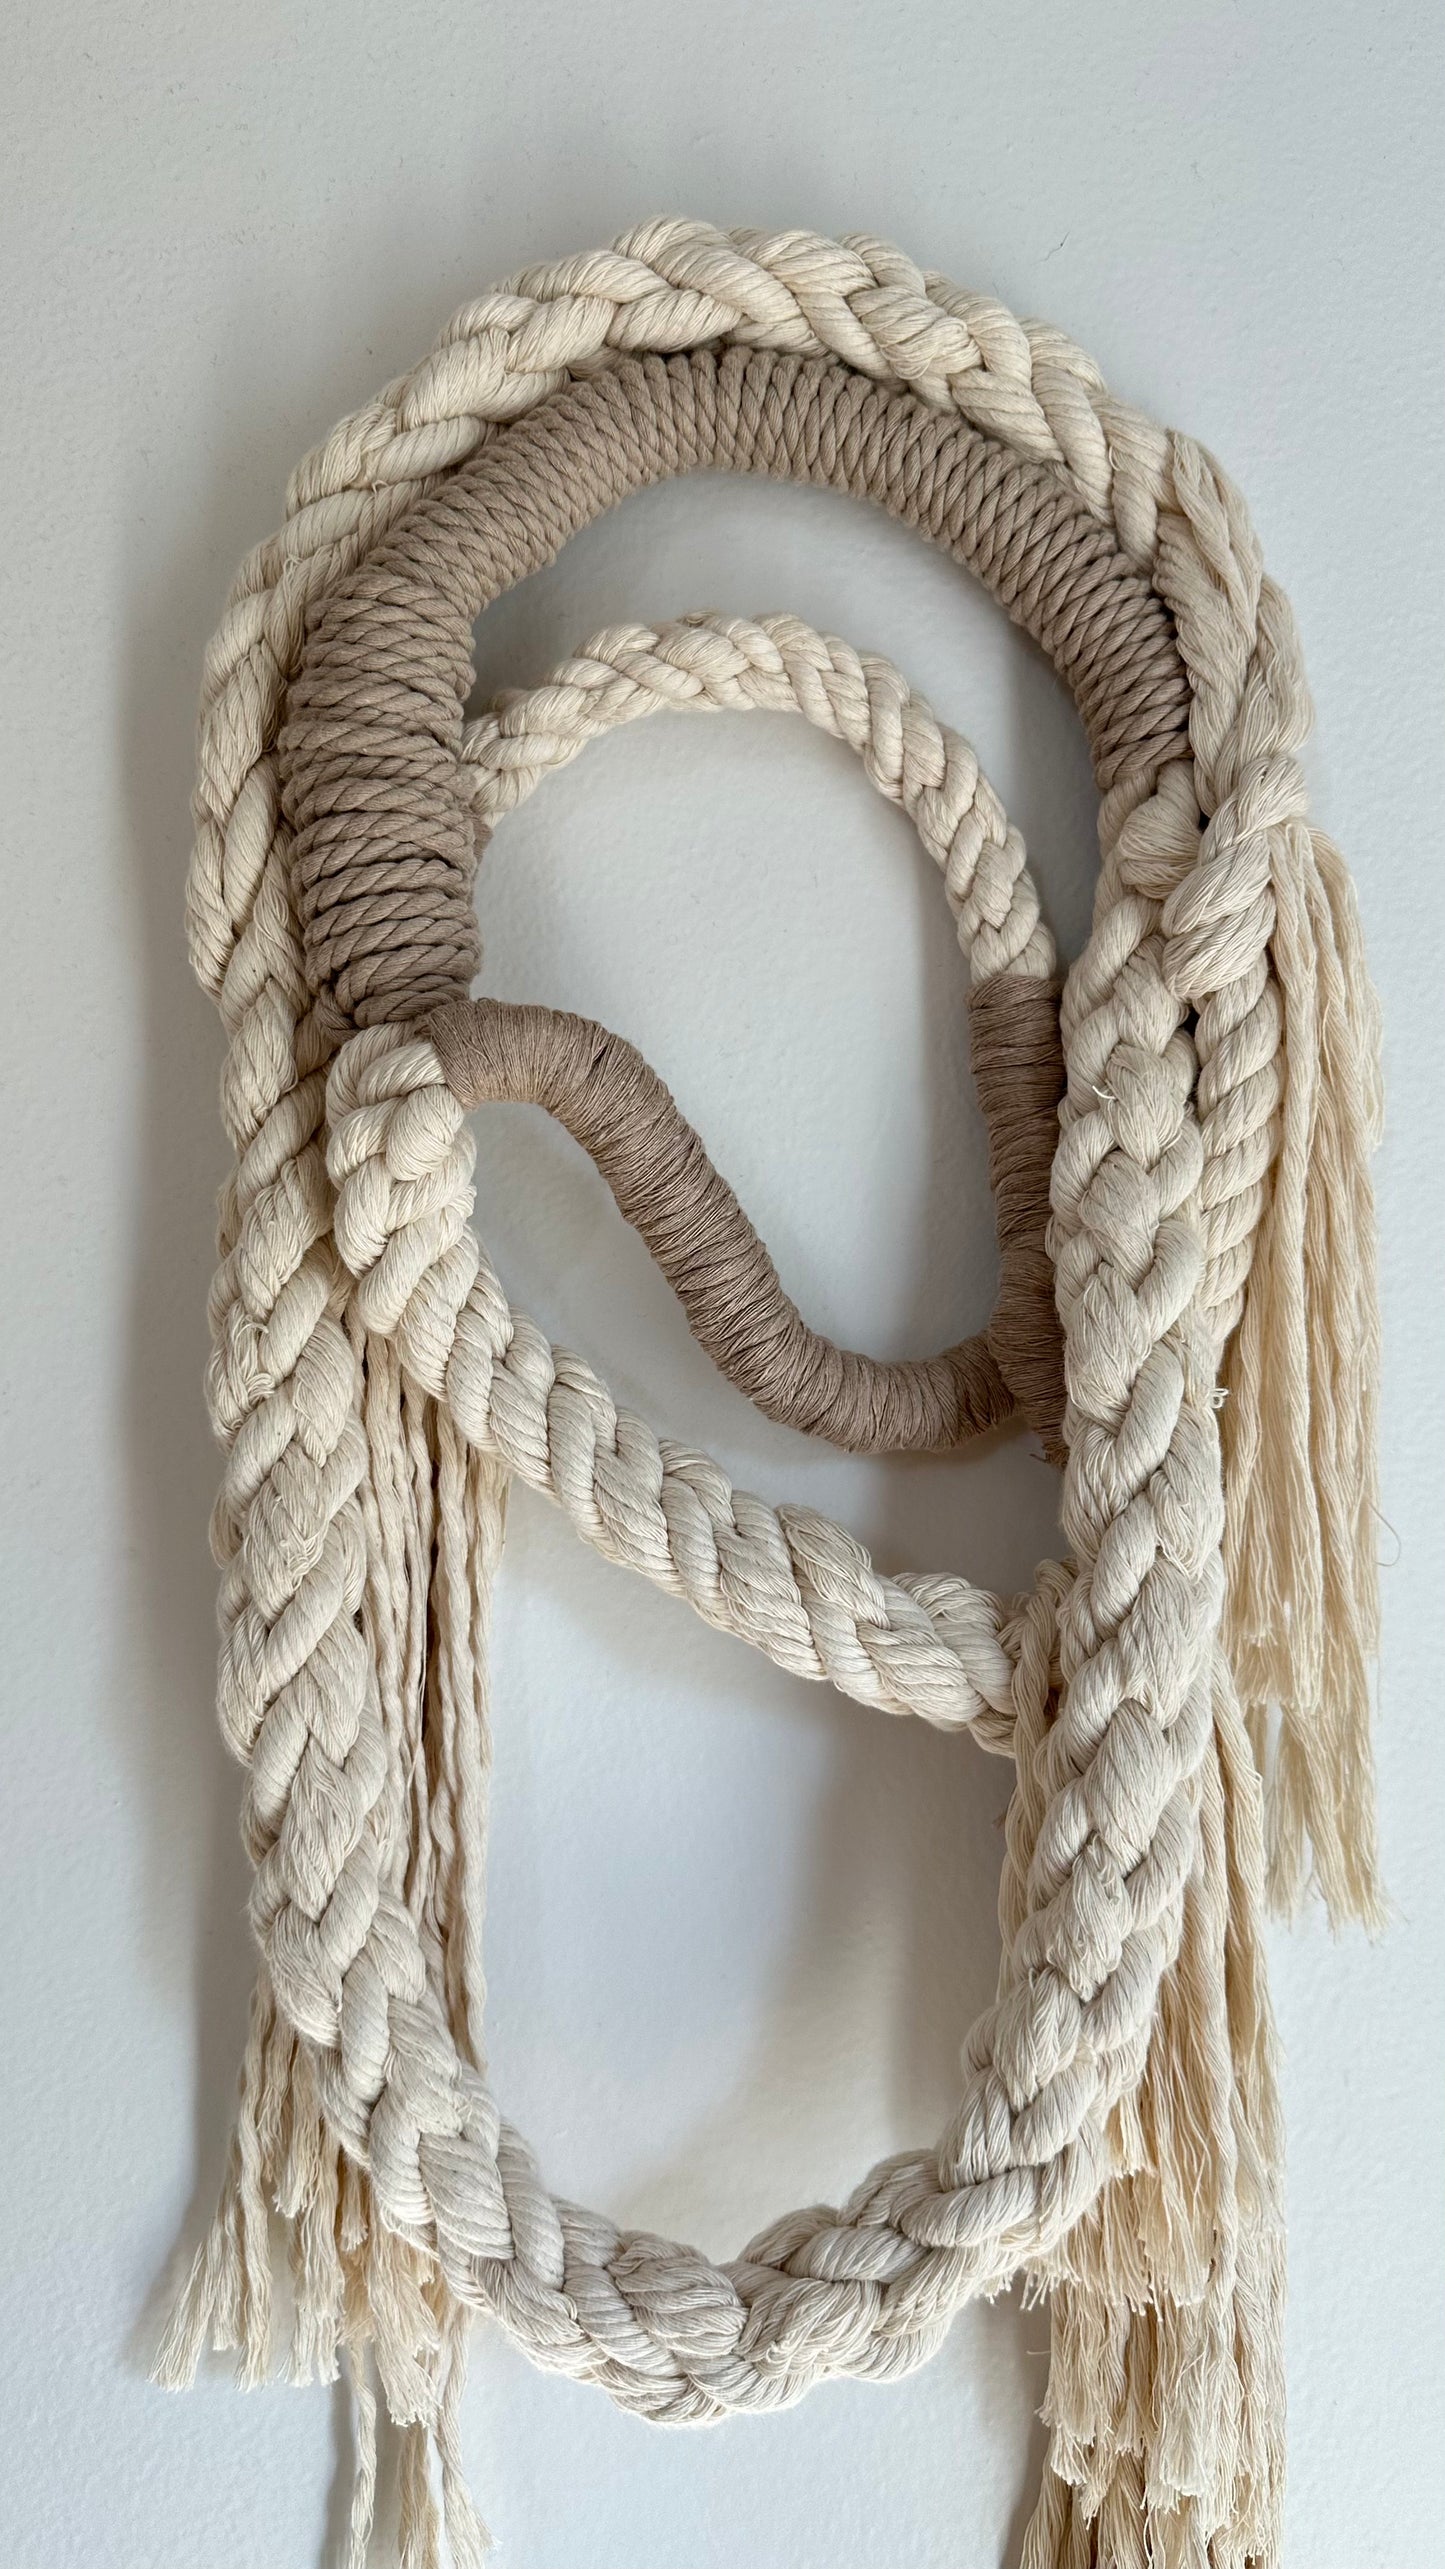 Wall Hanging made of natural colored and tan rope. 